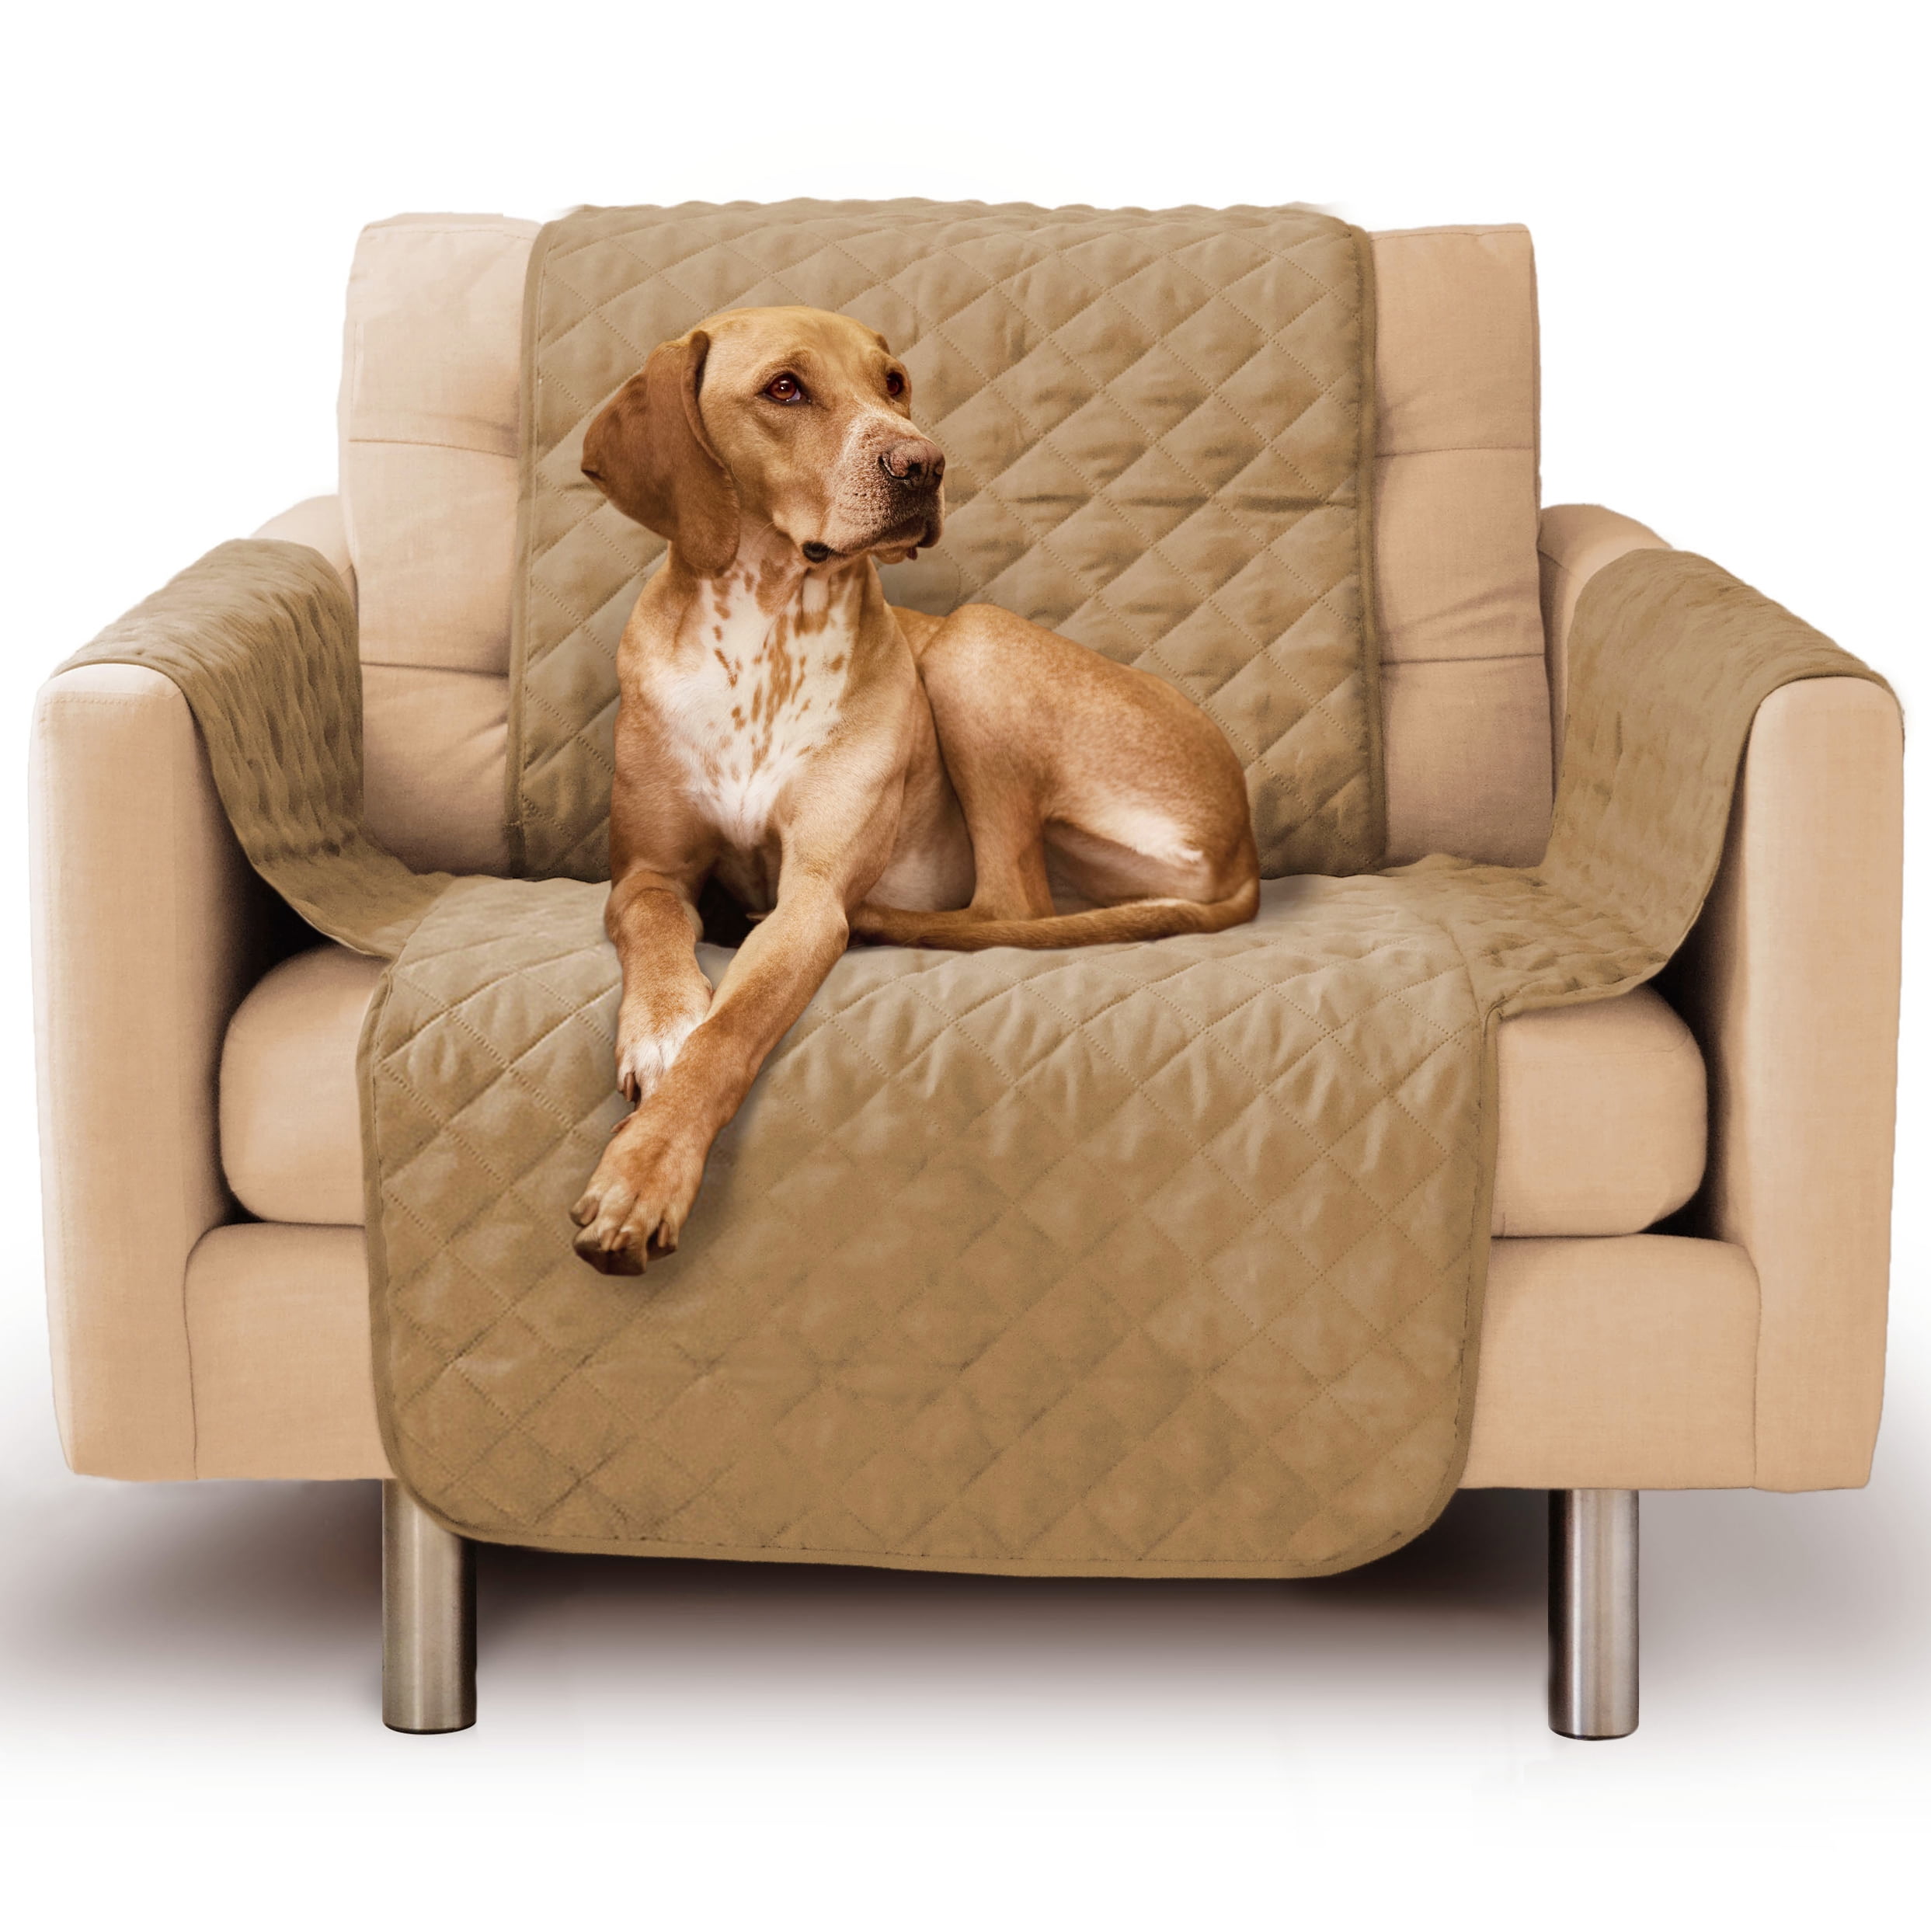 Precious Tails HomeBase Microsuede Dog Chair Cover, Camel, Small, 65"L x 70.5"W x .25"H